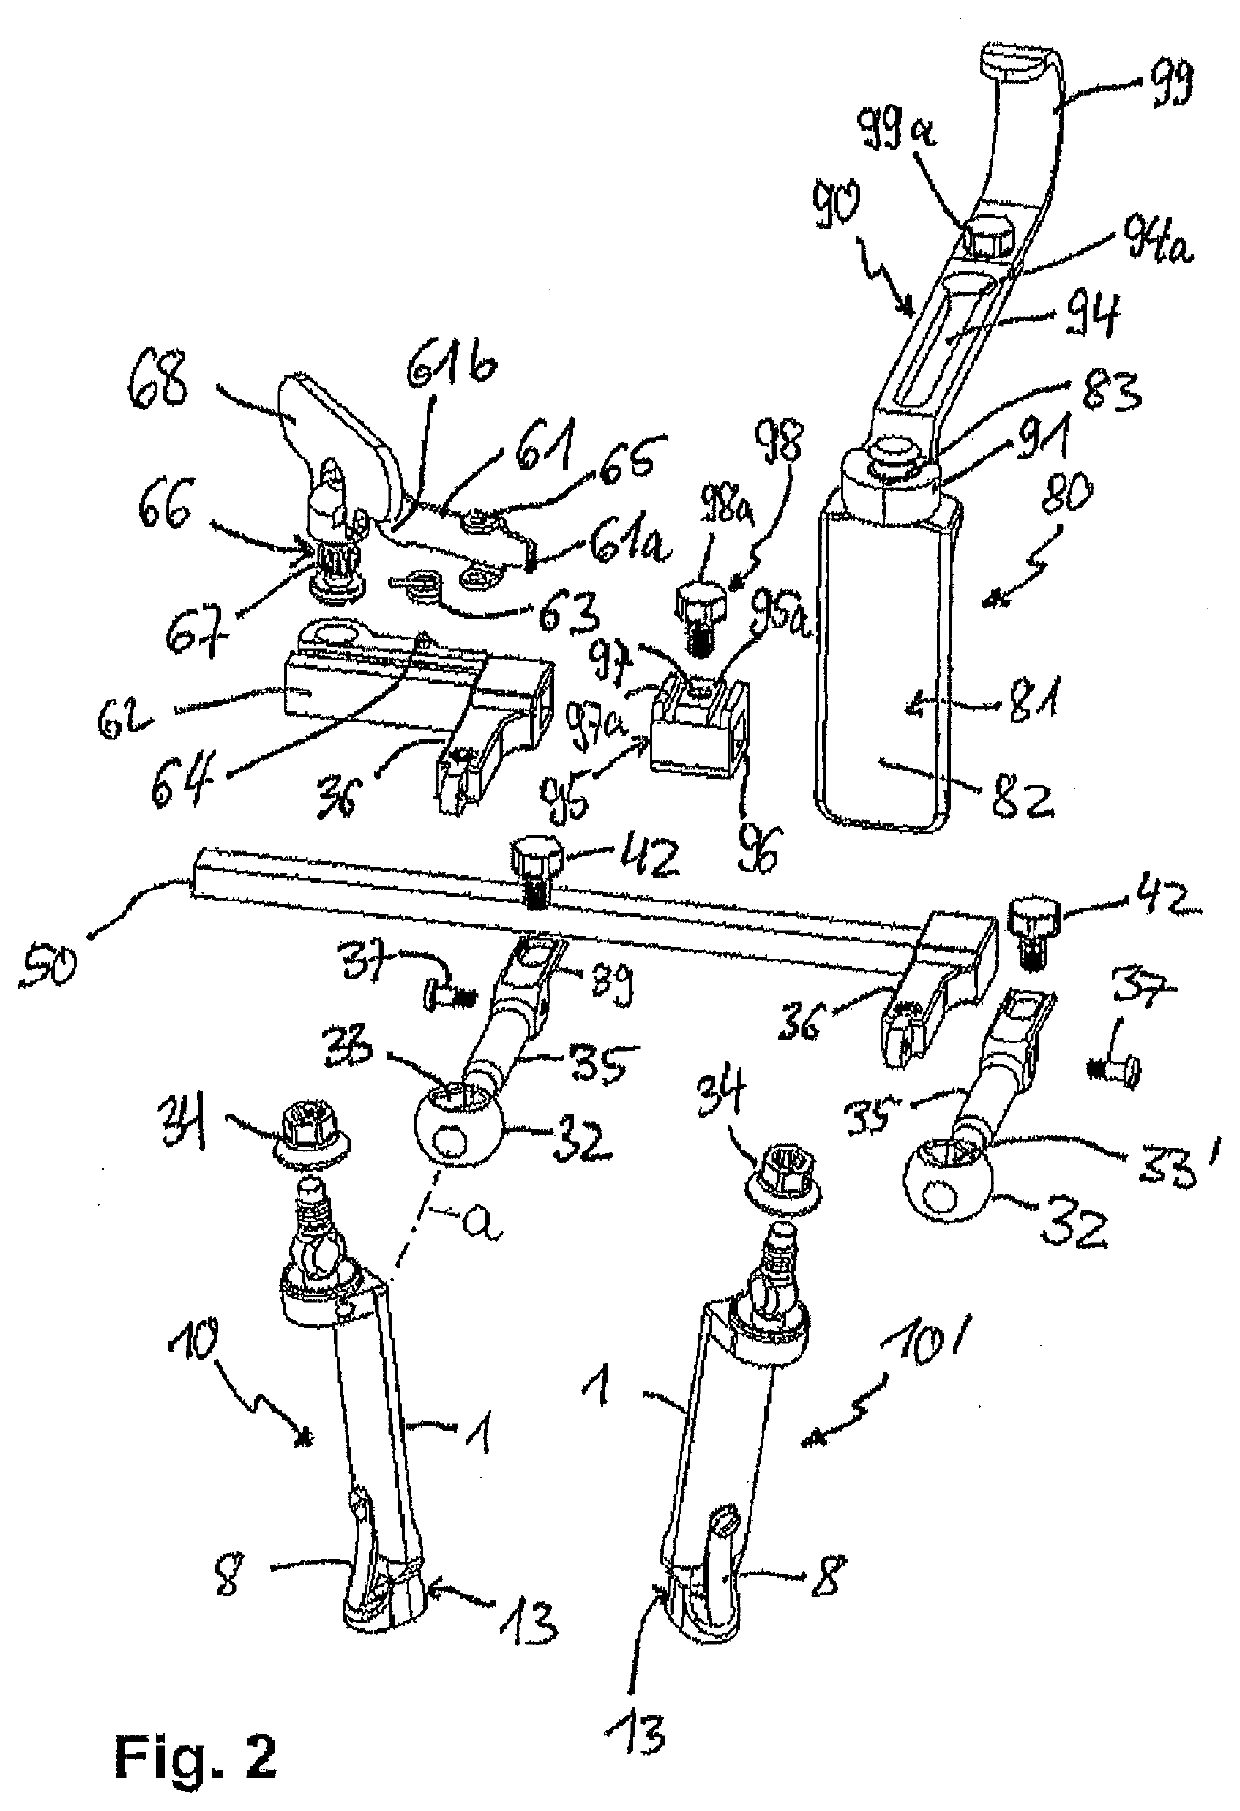 Instrument for attaching to a bone anchor and instrument for use in distraction and/or retraction, in particular for orthopedic surgery or neurosurgery, more specifically for spinal surgery